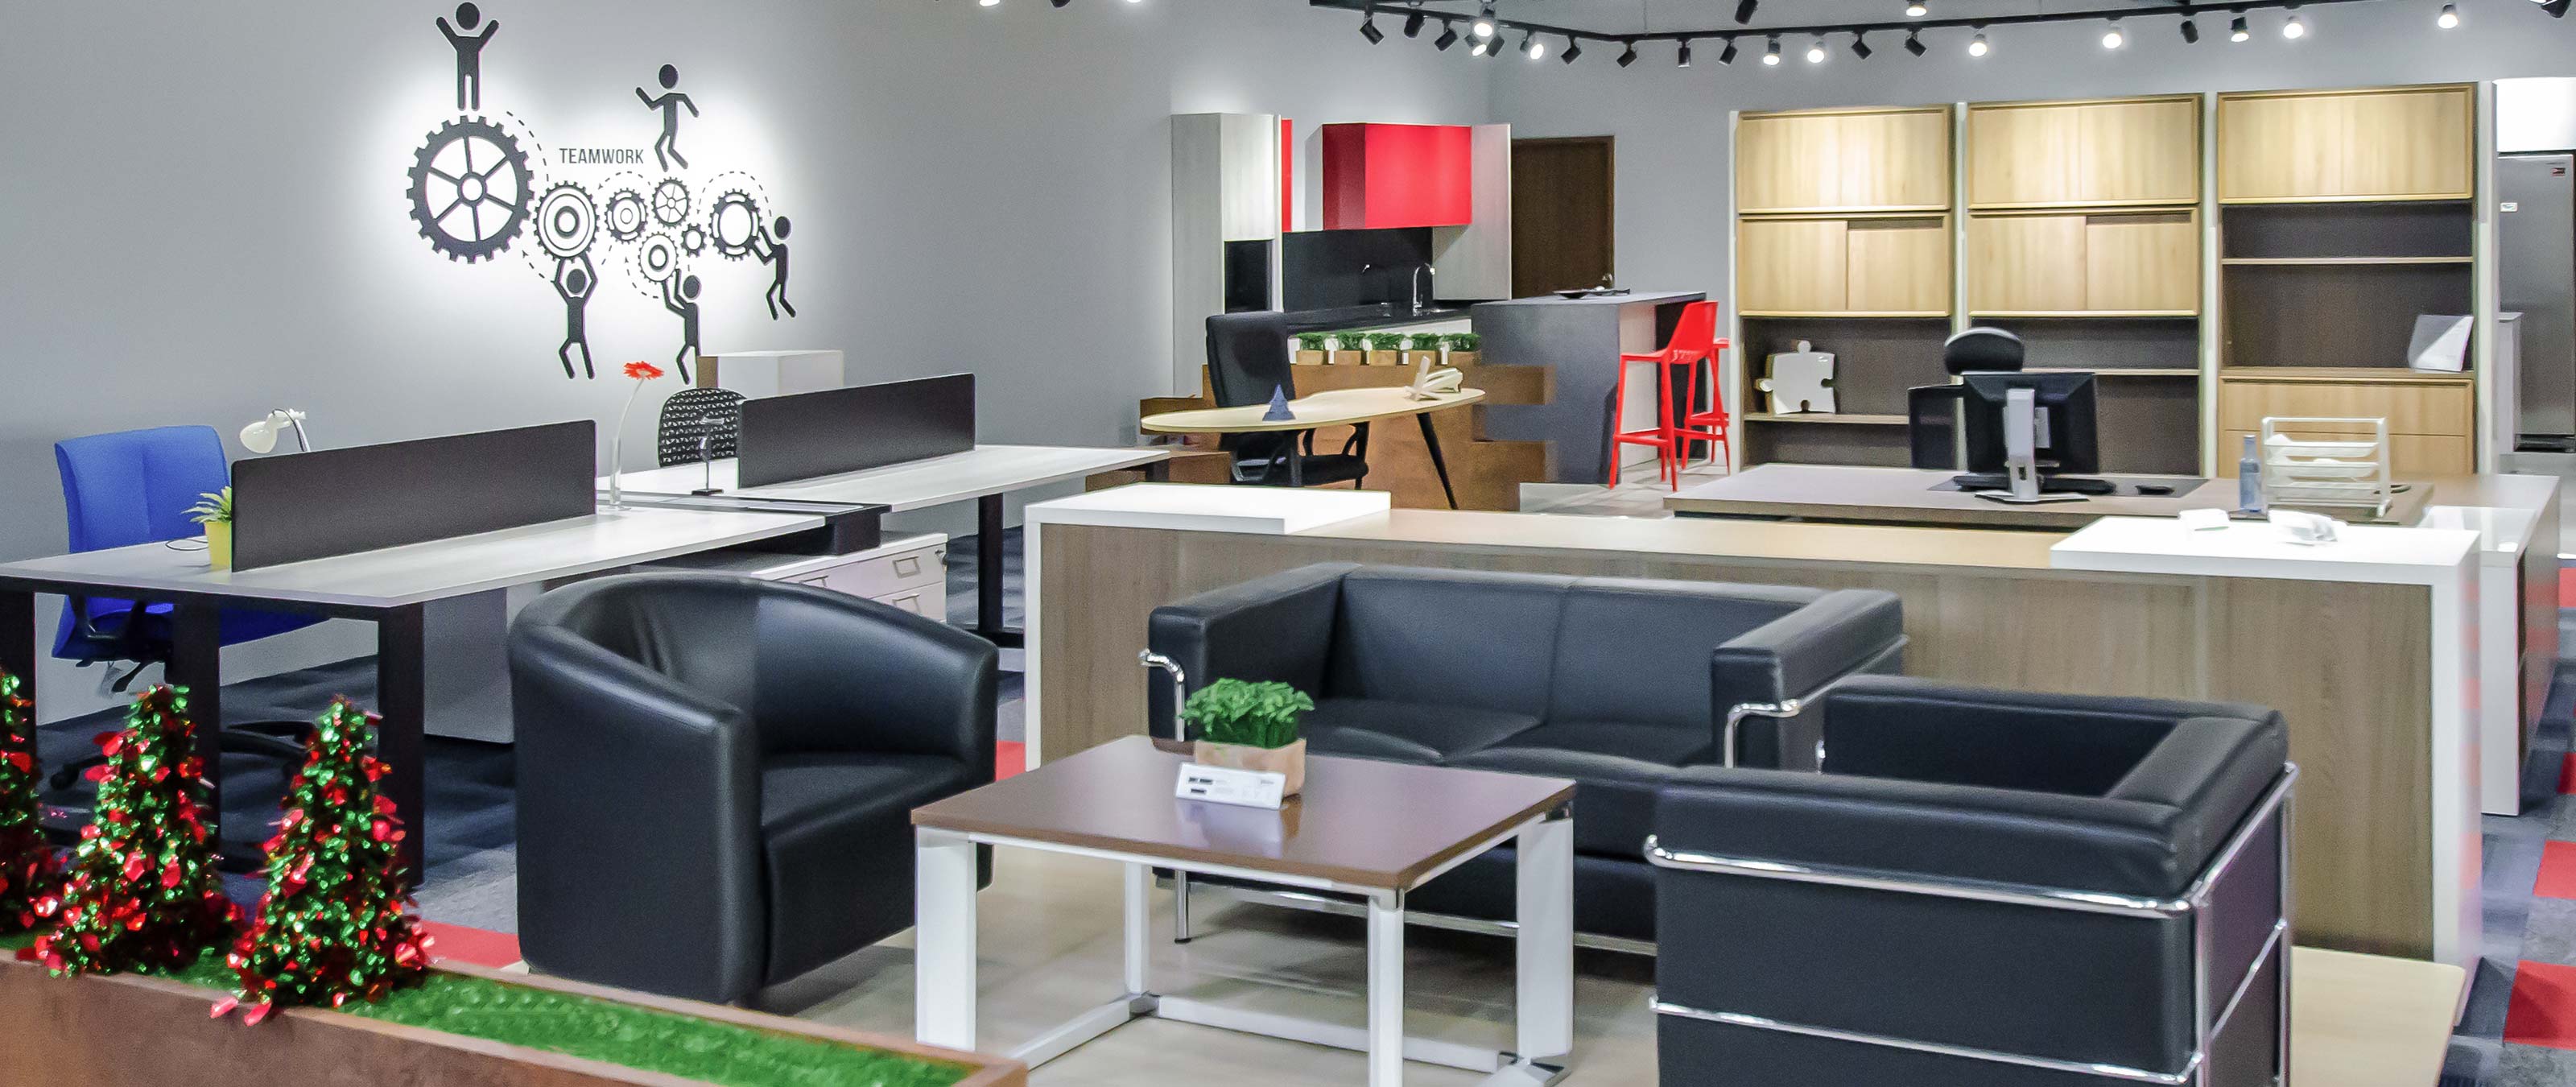 Pyramid Lane, based near Kuala Lumpur, Malaysia, has been manufacturing office furniture and kitchens specifically designed for the Asian market since 1997. 